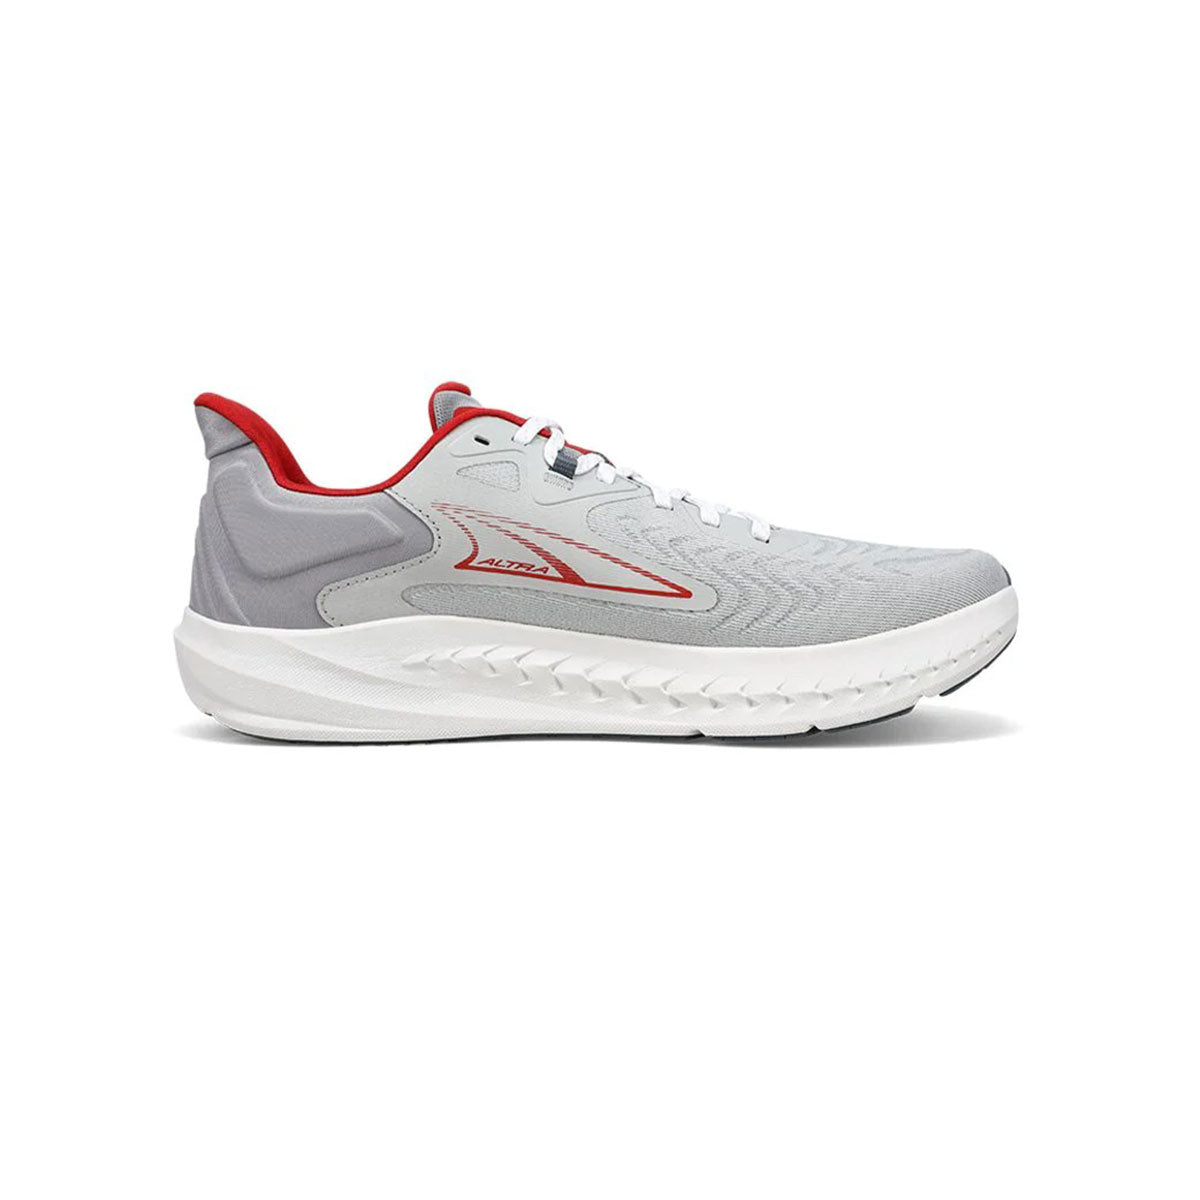 ALTRA TORIN 7 M Gray/Red